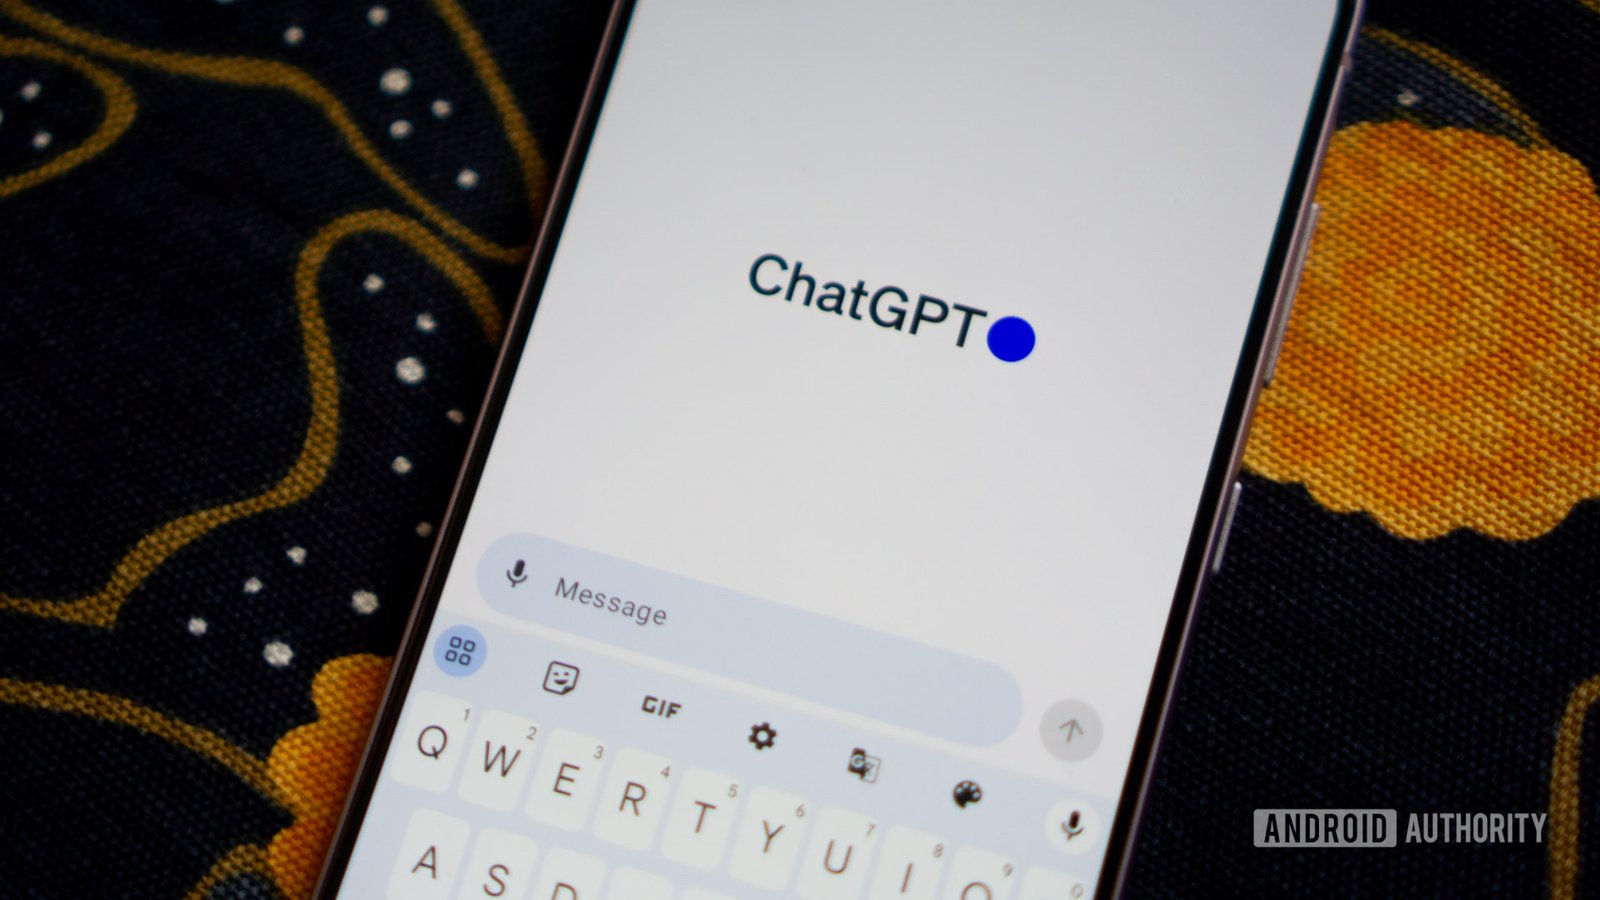 ChatGPT’s Memory and Temporary Chat features are now rolling out